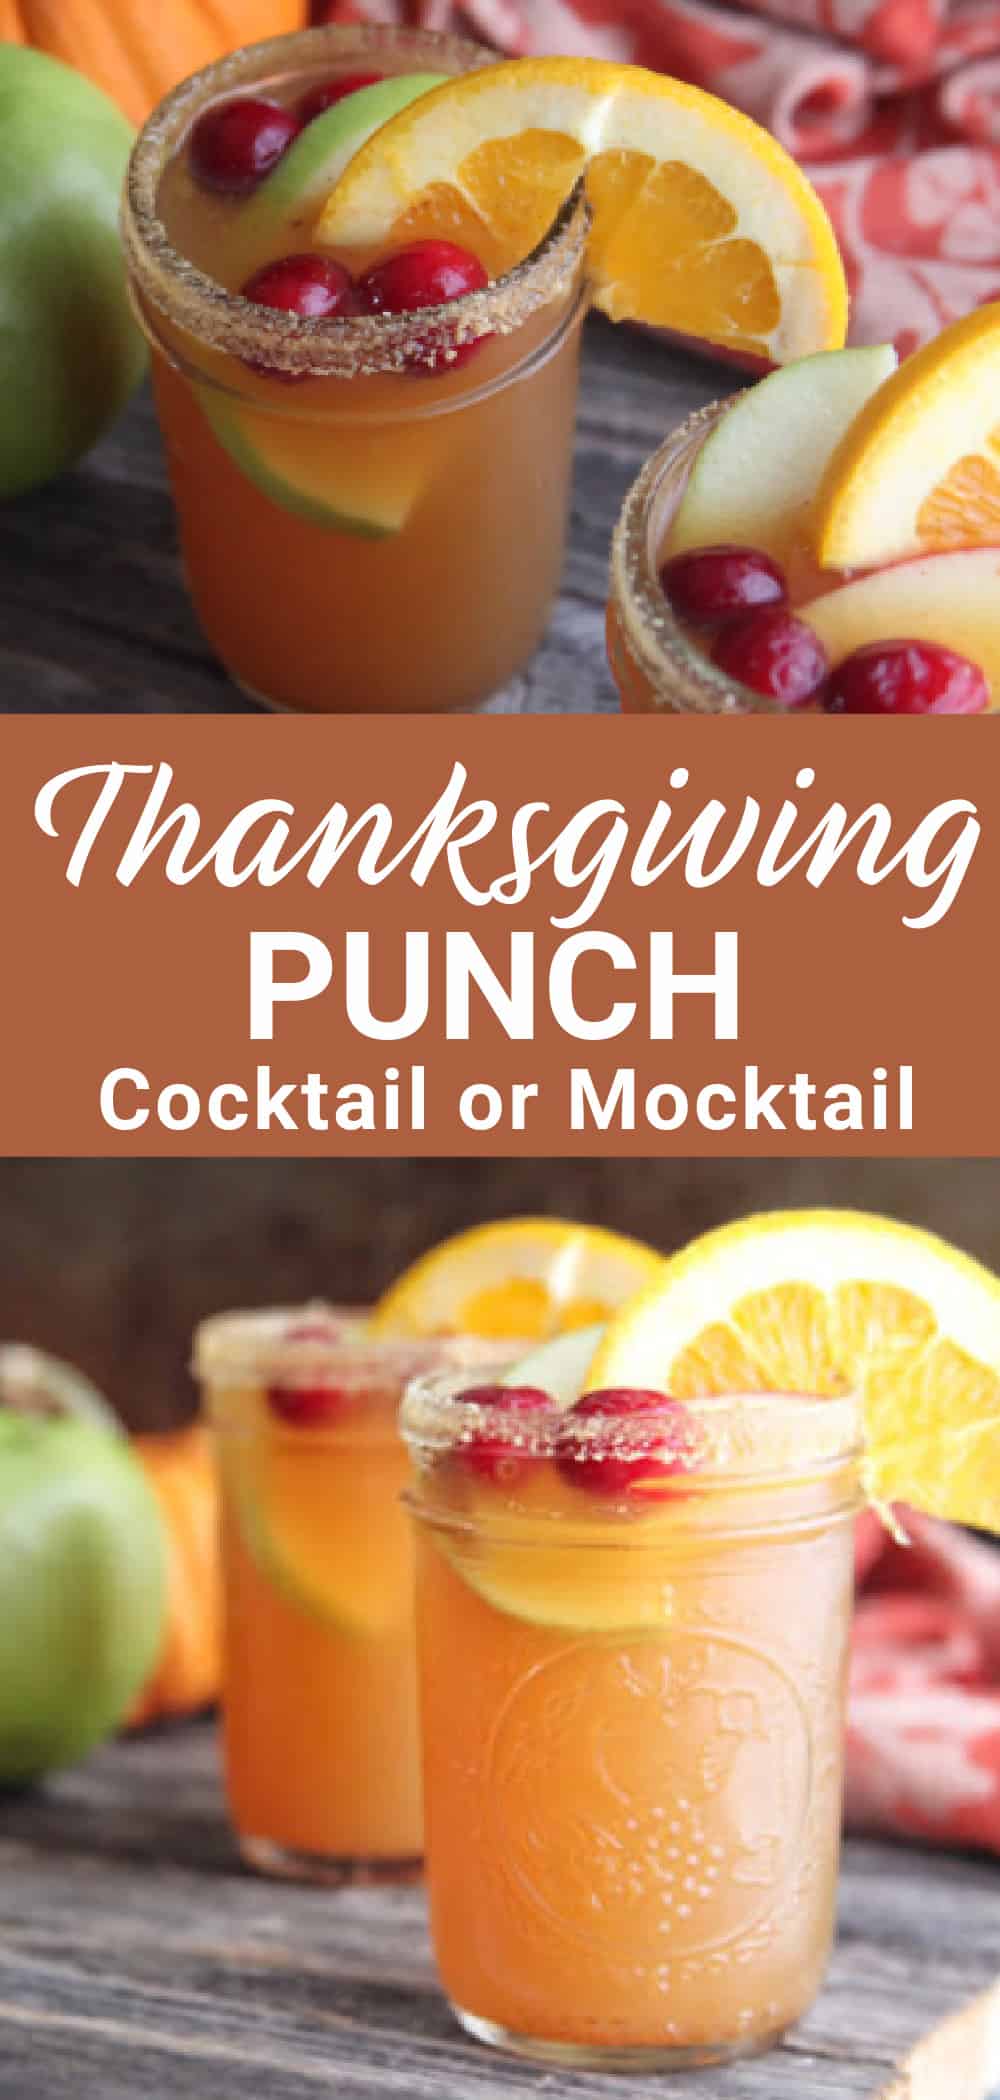 Thanksgiving Punch Recipe | Holiday Cocktail or Mocktail